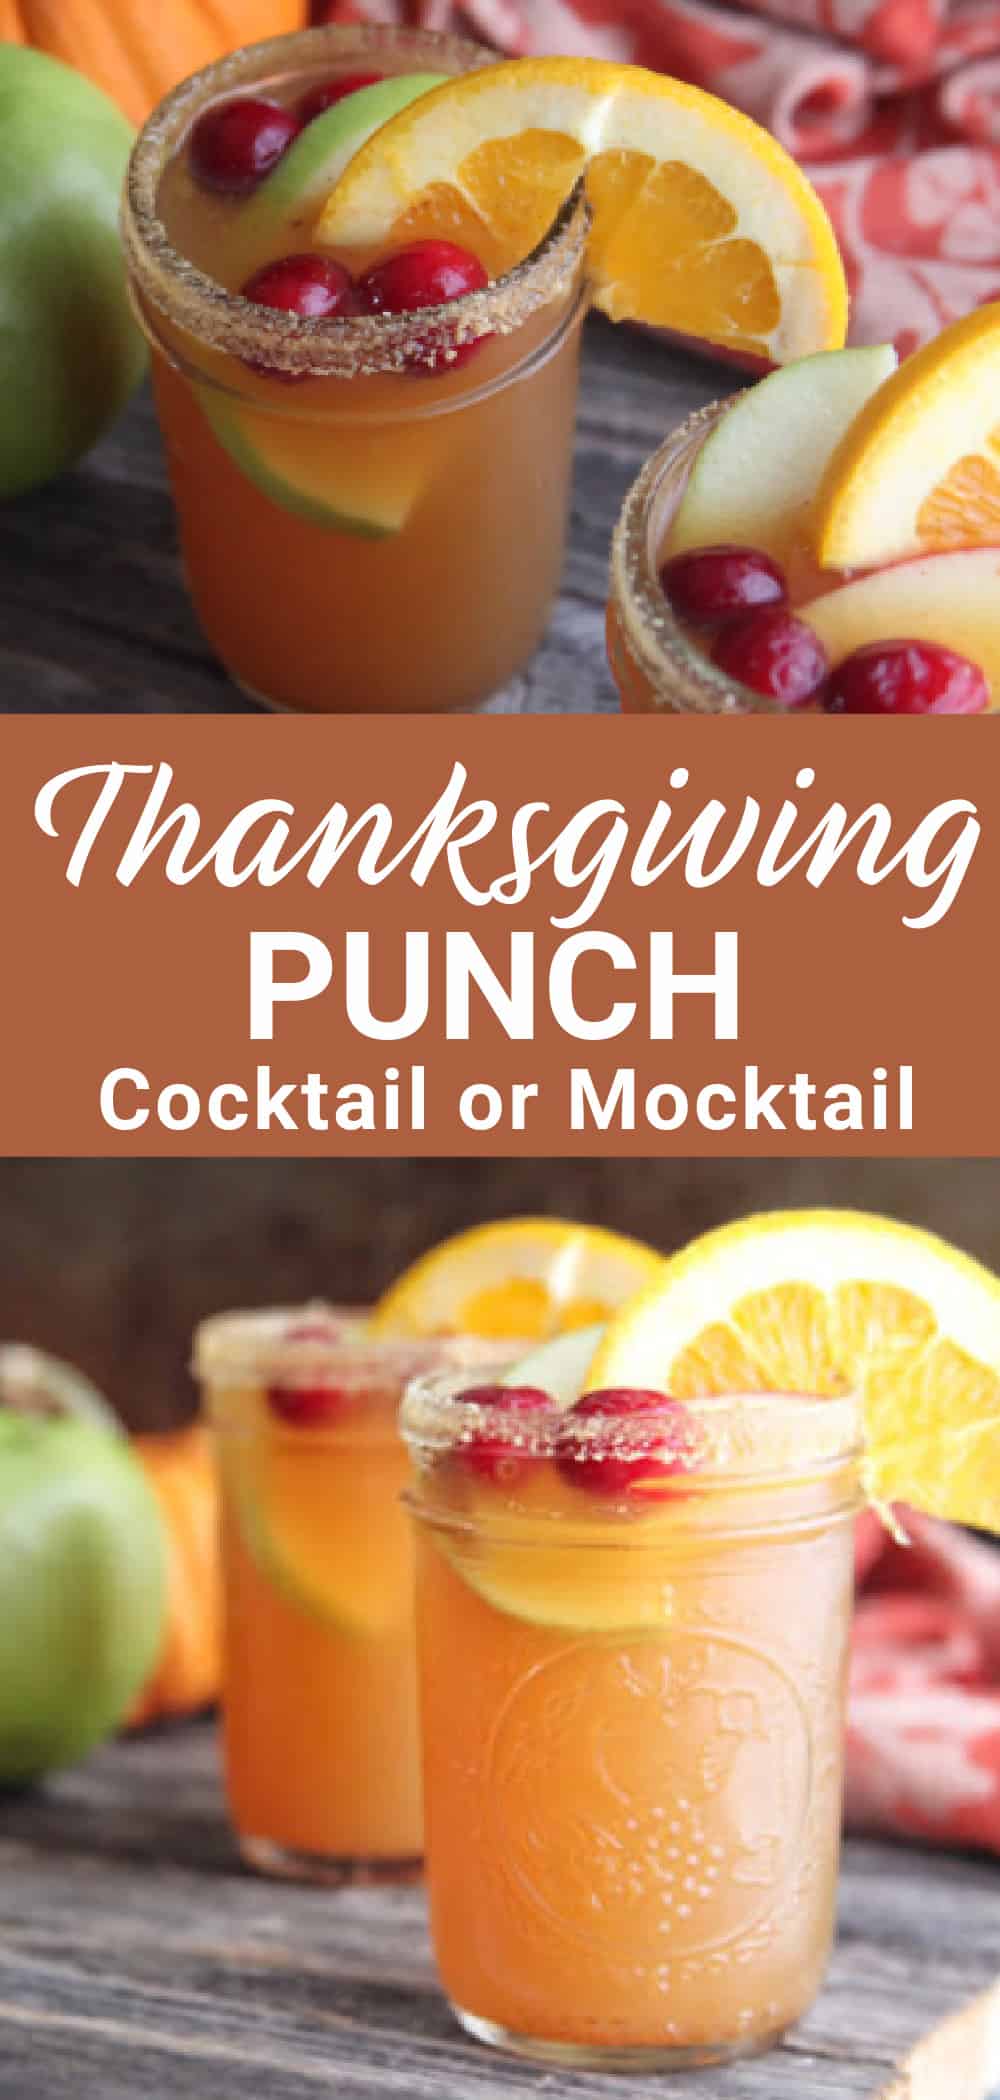 Thanksgiving Punch Recipe | Holiday Cocktail or Mocktail